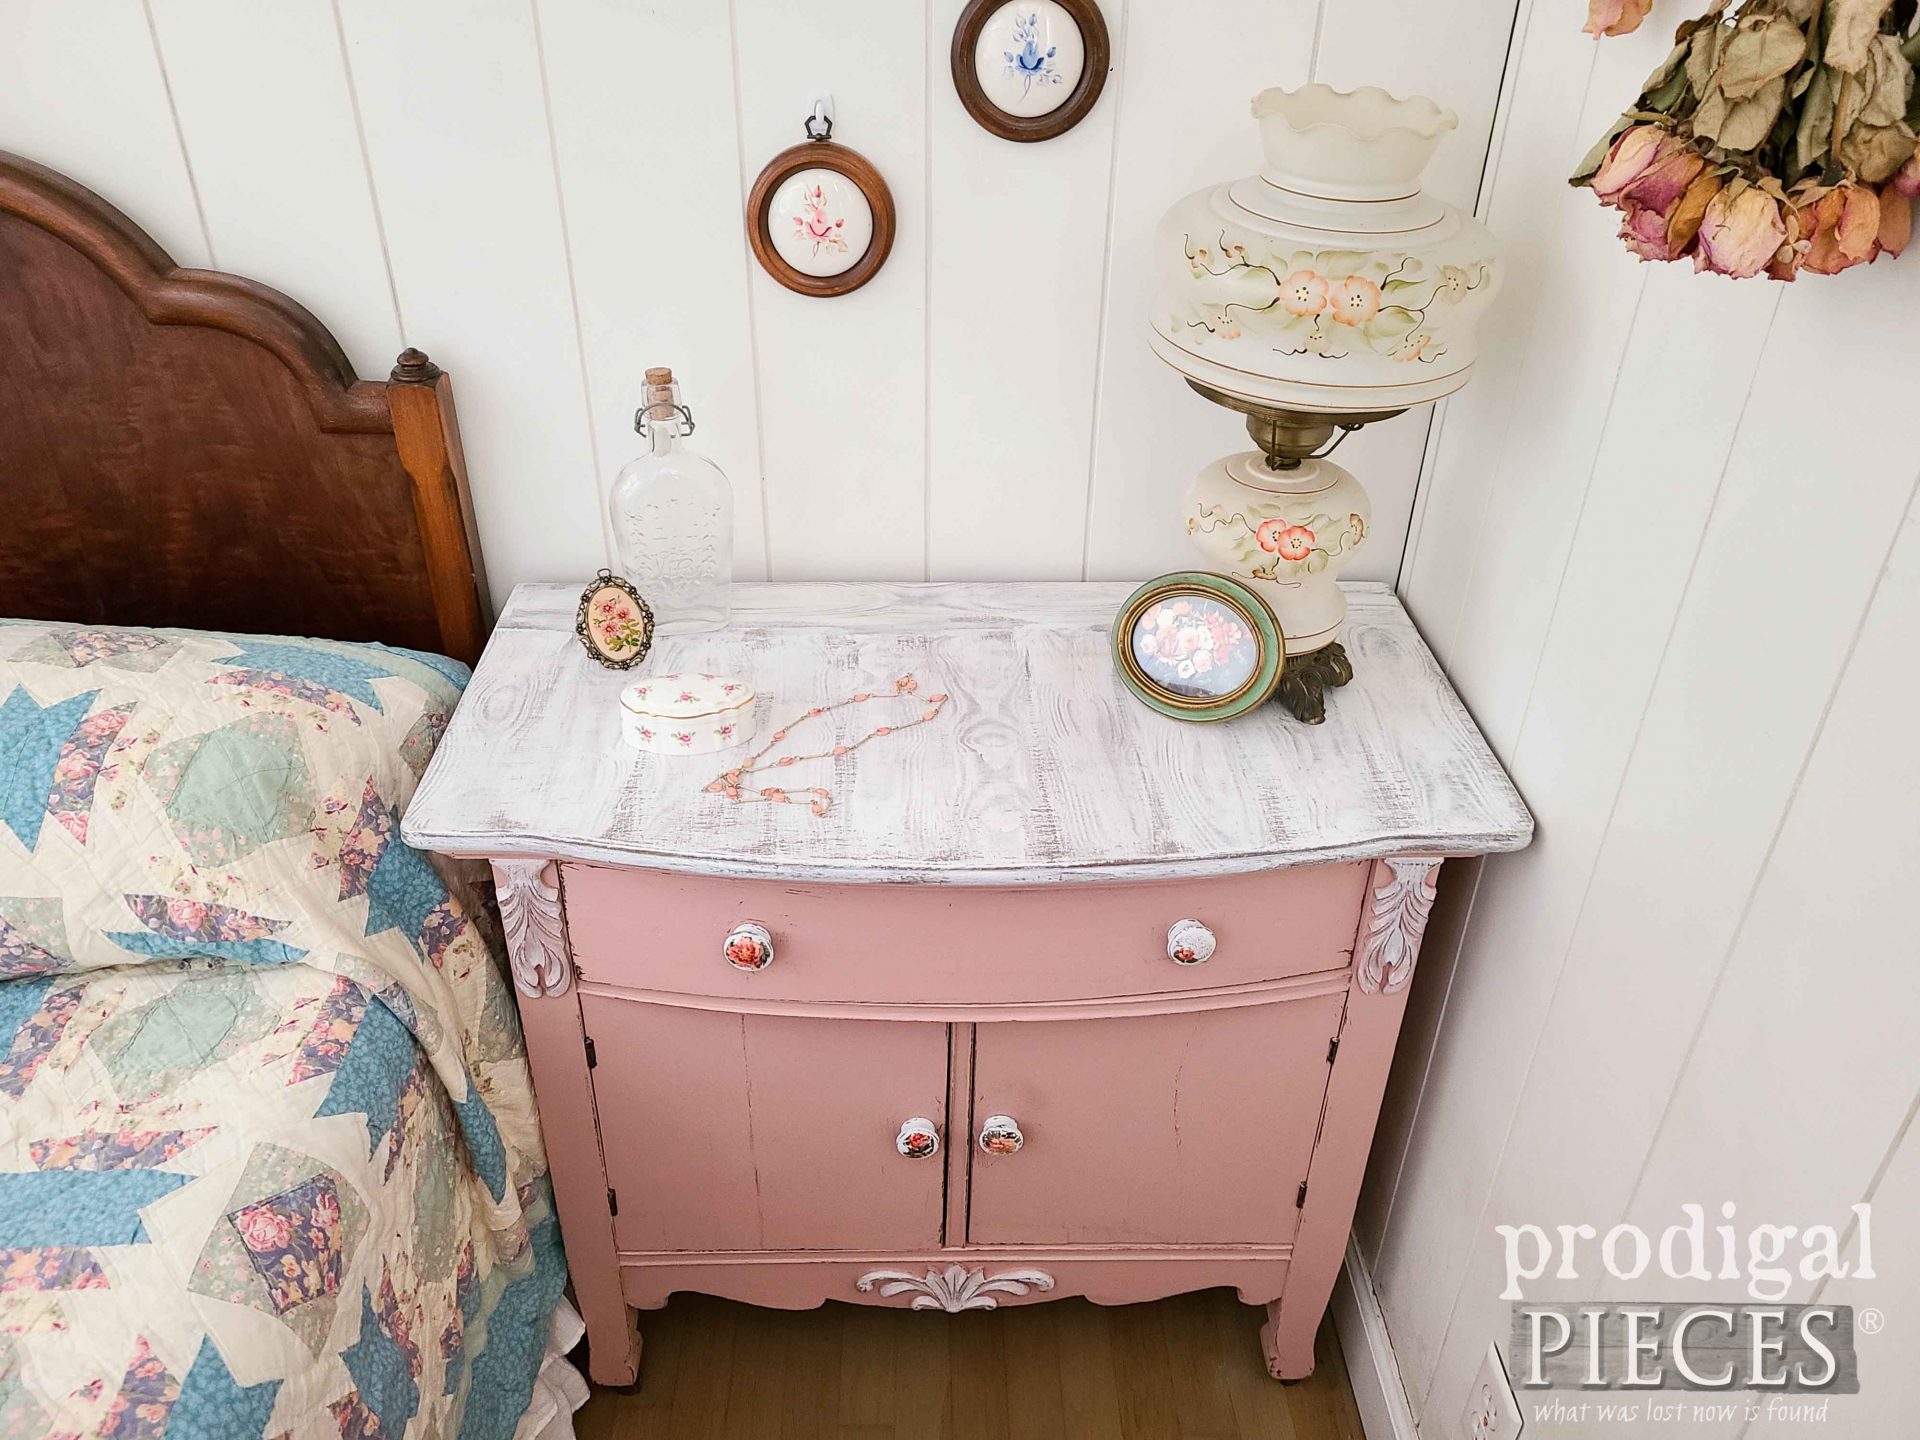 Top View of Wash Stand by Larissa of Prodigal Pieces | prodigalpieces.com #prodigalpieces #farmhouse #shabbychic #antique #furniture